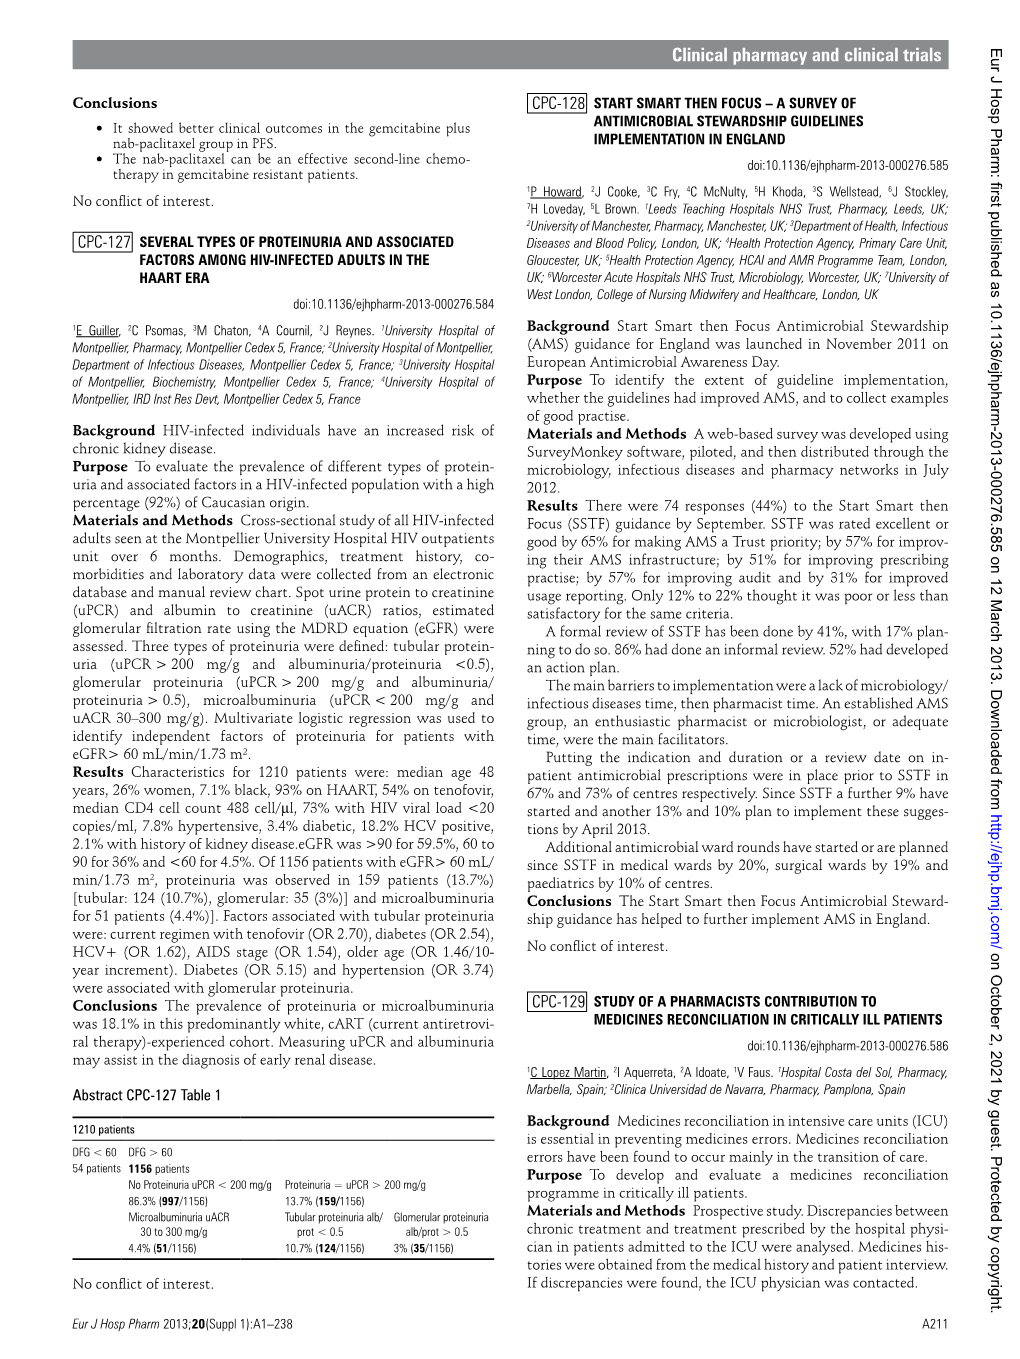 Clinical Pharmacy and Clinical Trials Eur J Hosp Pharm: First Published As 10.1136/Ejhpharm-2013-000276.585 on 12 March 2013